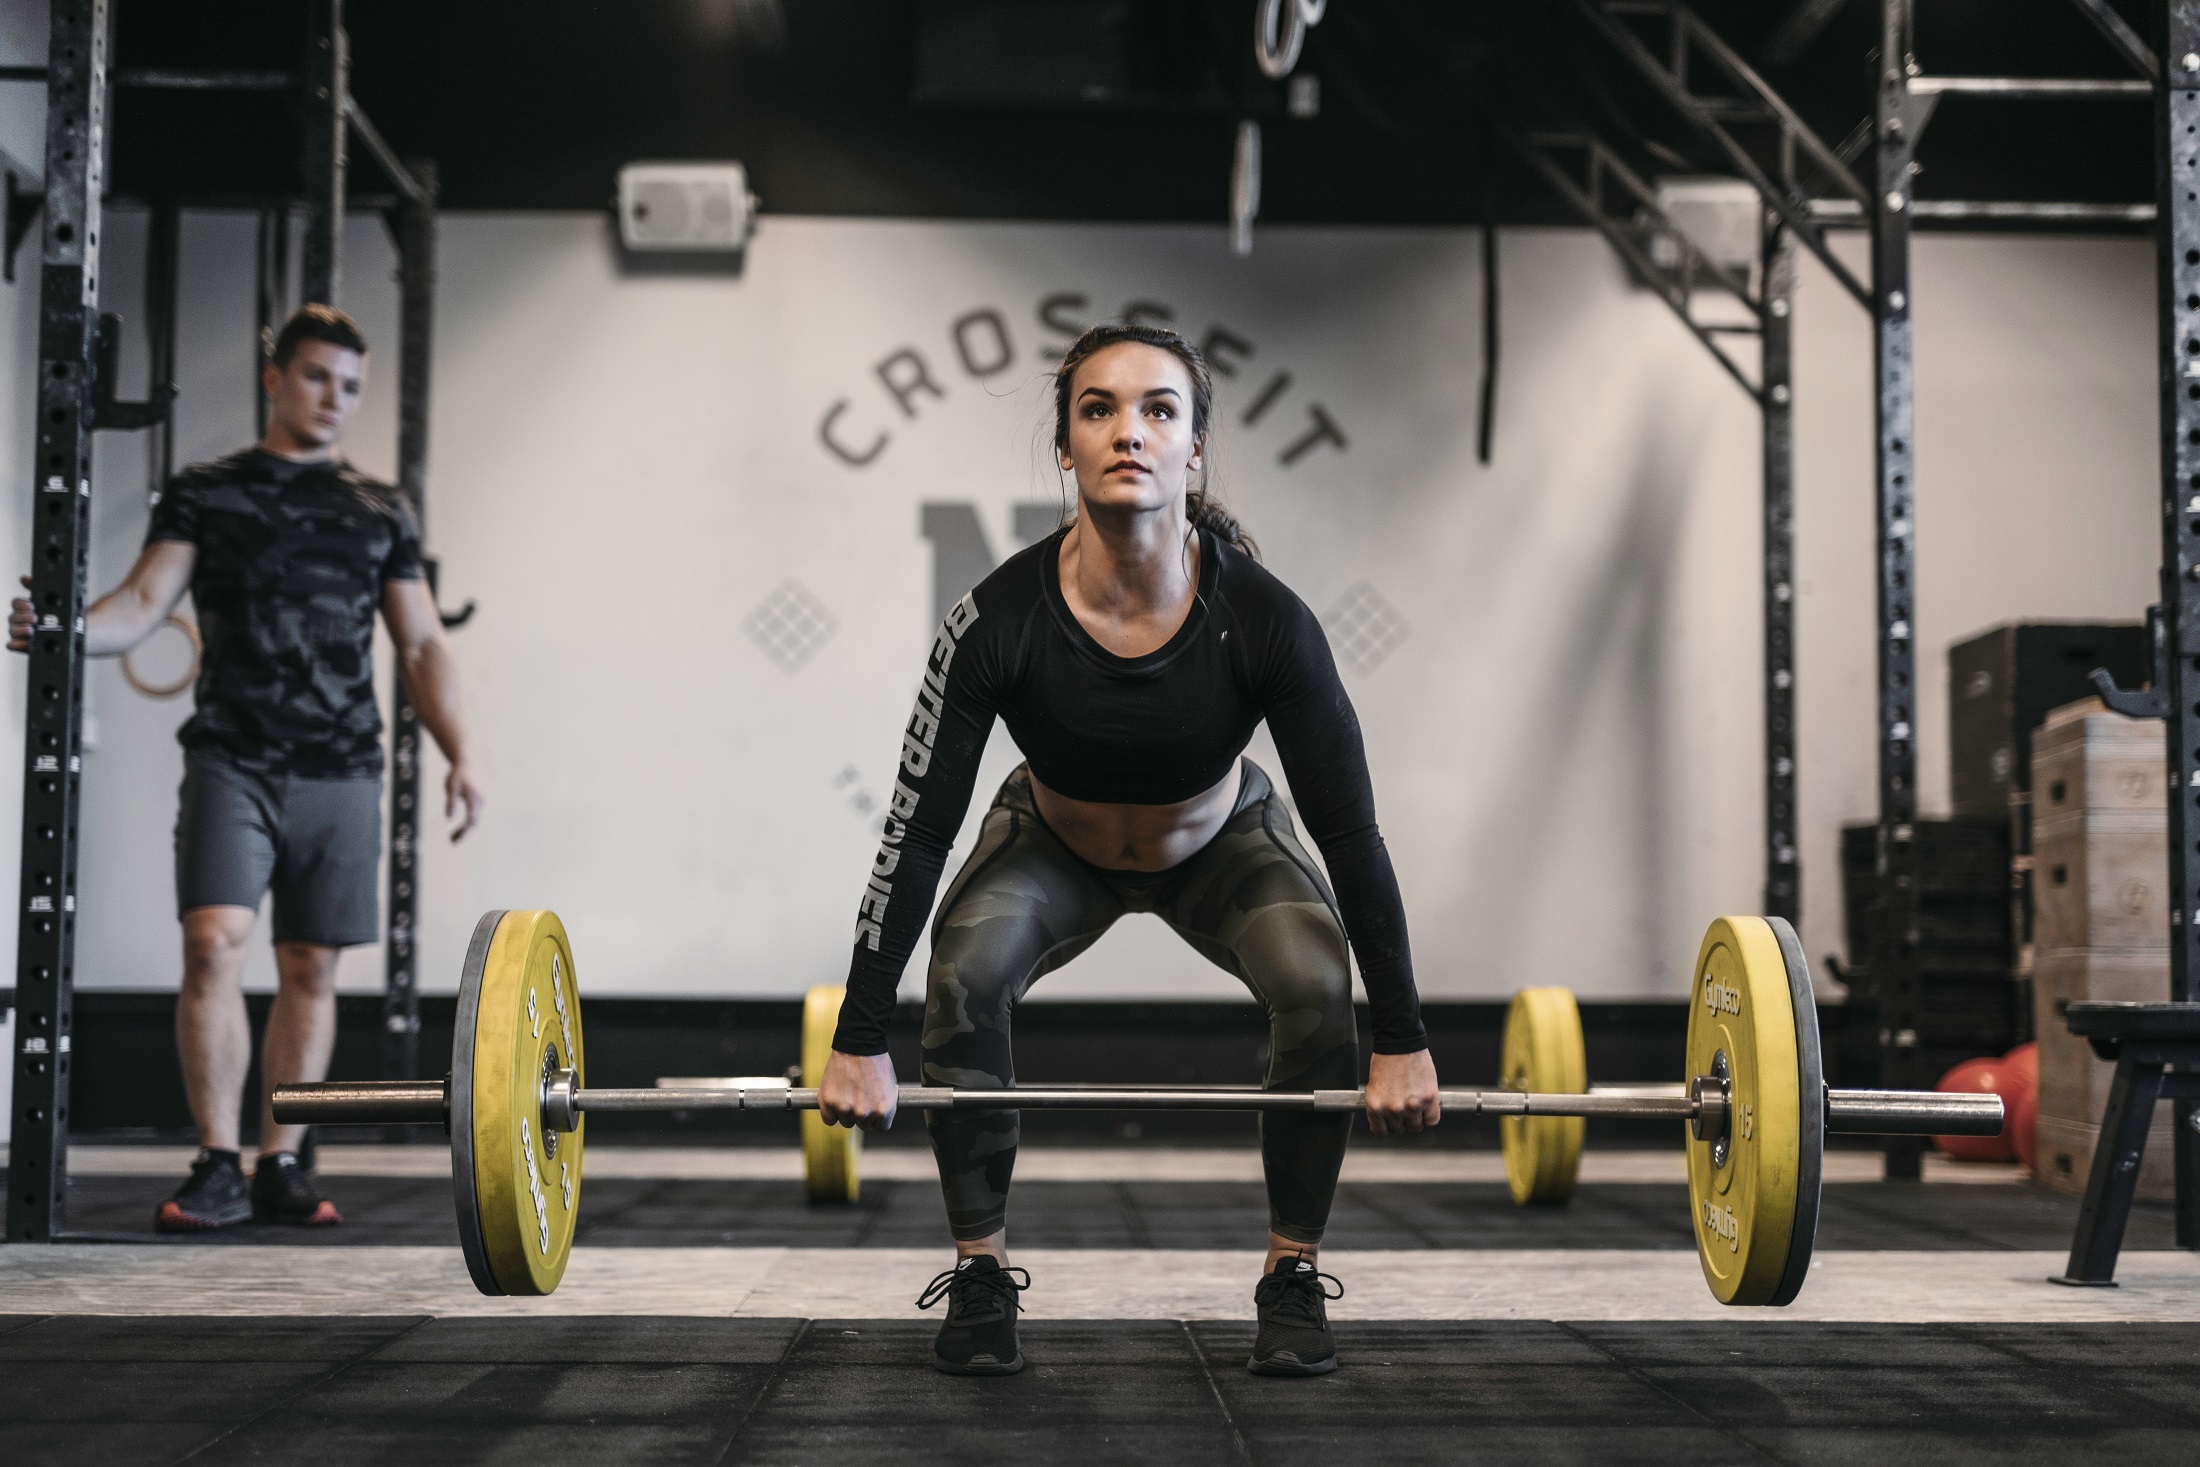 Heavy Rep Gear  athletic training CrossFit and lifestyle clothing